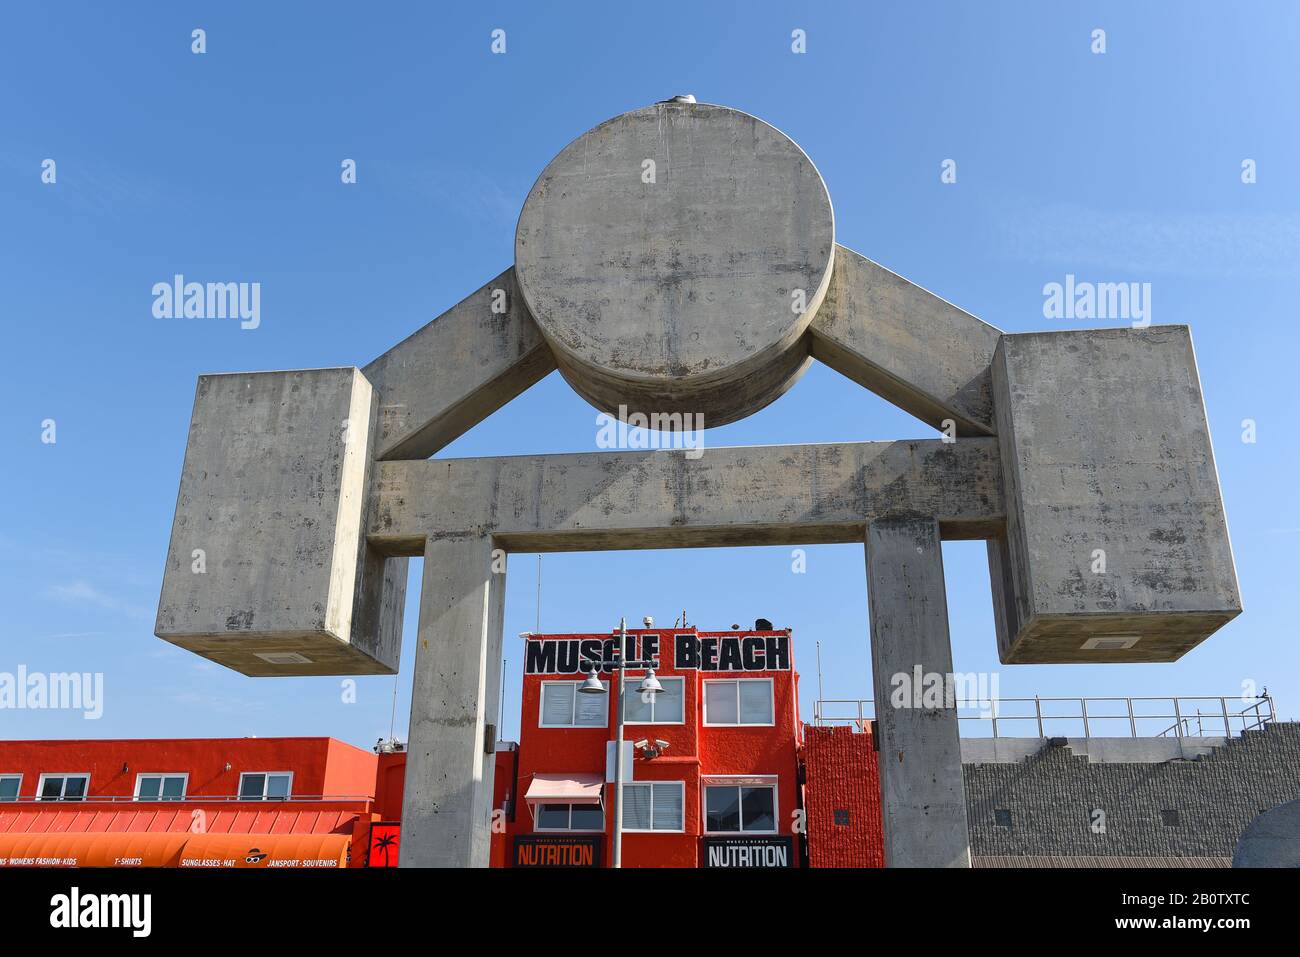 VENICE, CALIFORNIA - 17 FEB 2020: Muscle Beach outdoor gym is the location of the birthplace of the physical fitness boom in the US. Stock Photo